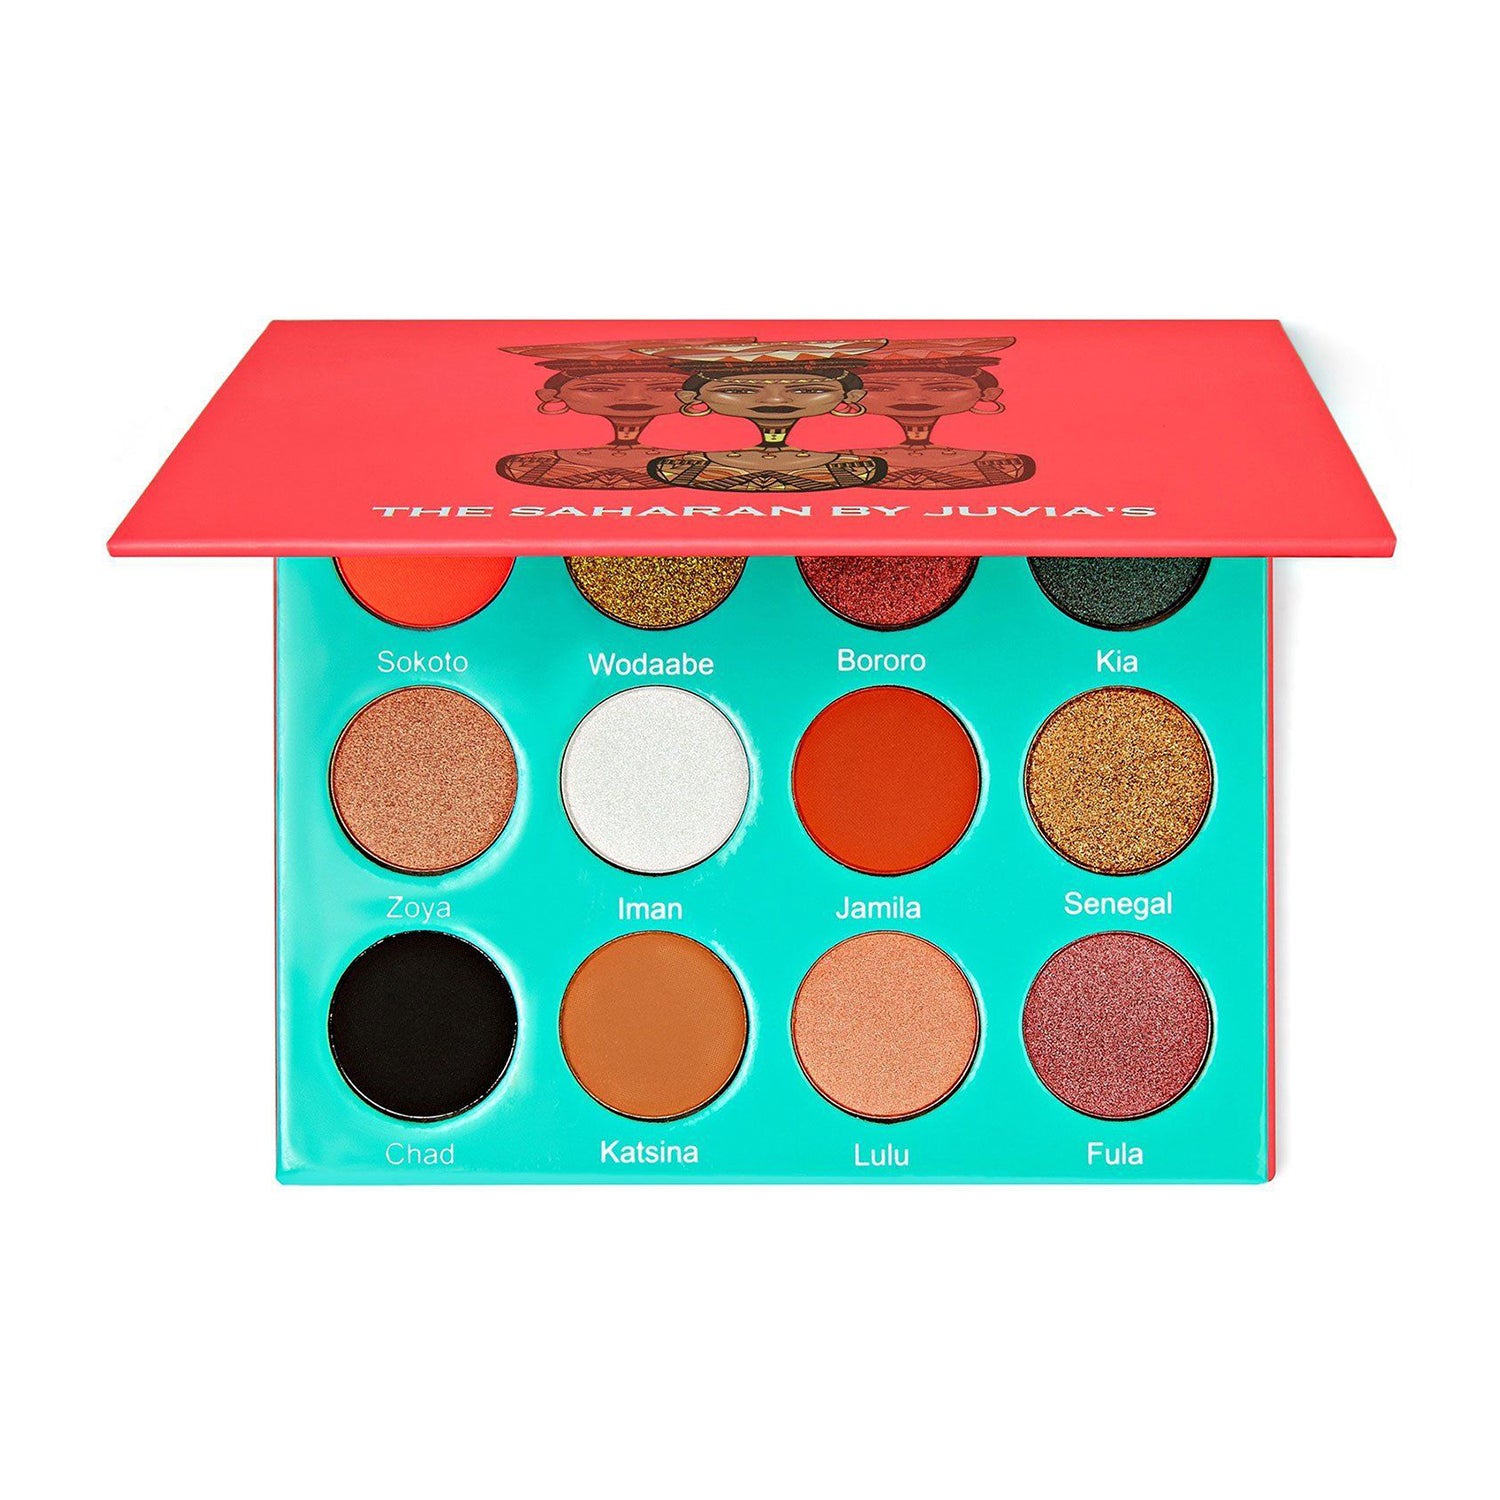 Juvia's The Saharan Eye Shadow Palette available at heygirl.pk for delivery in Pakistan